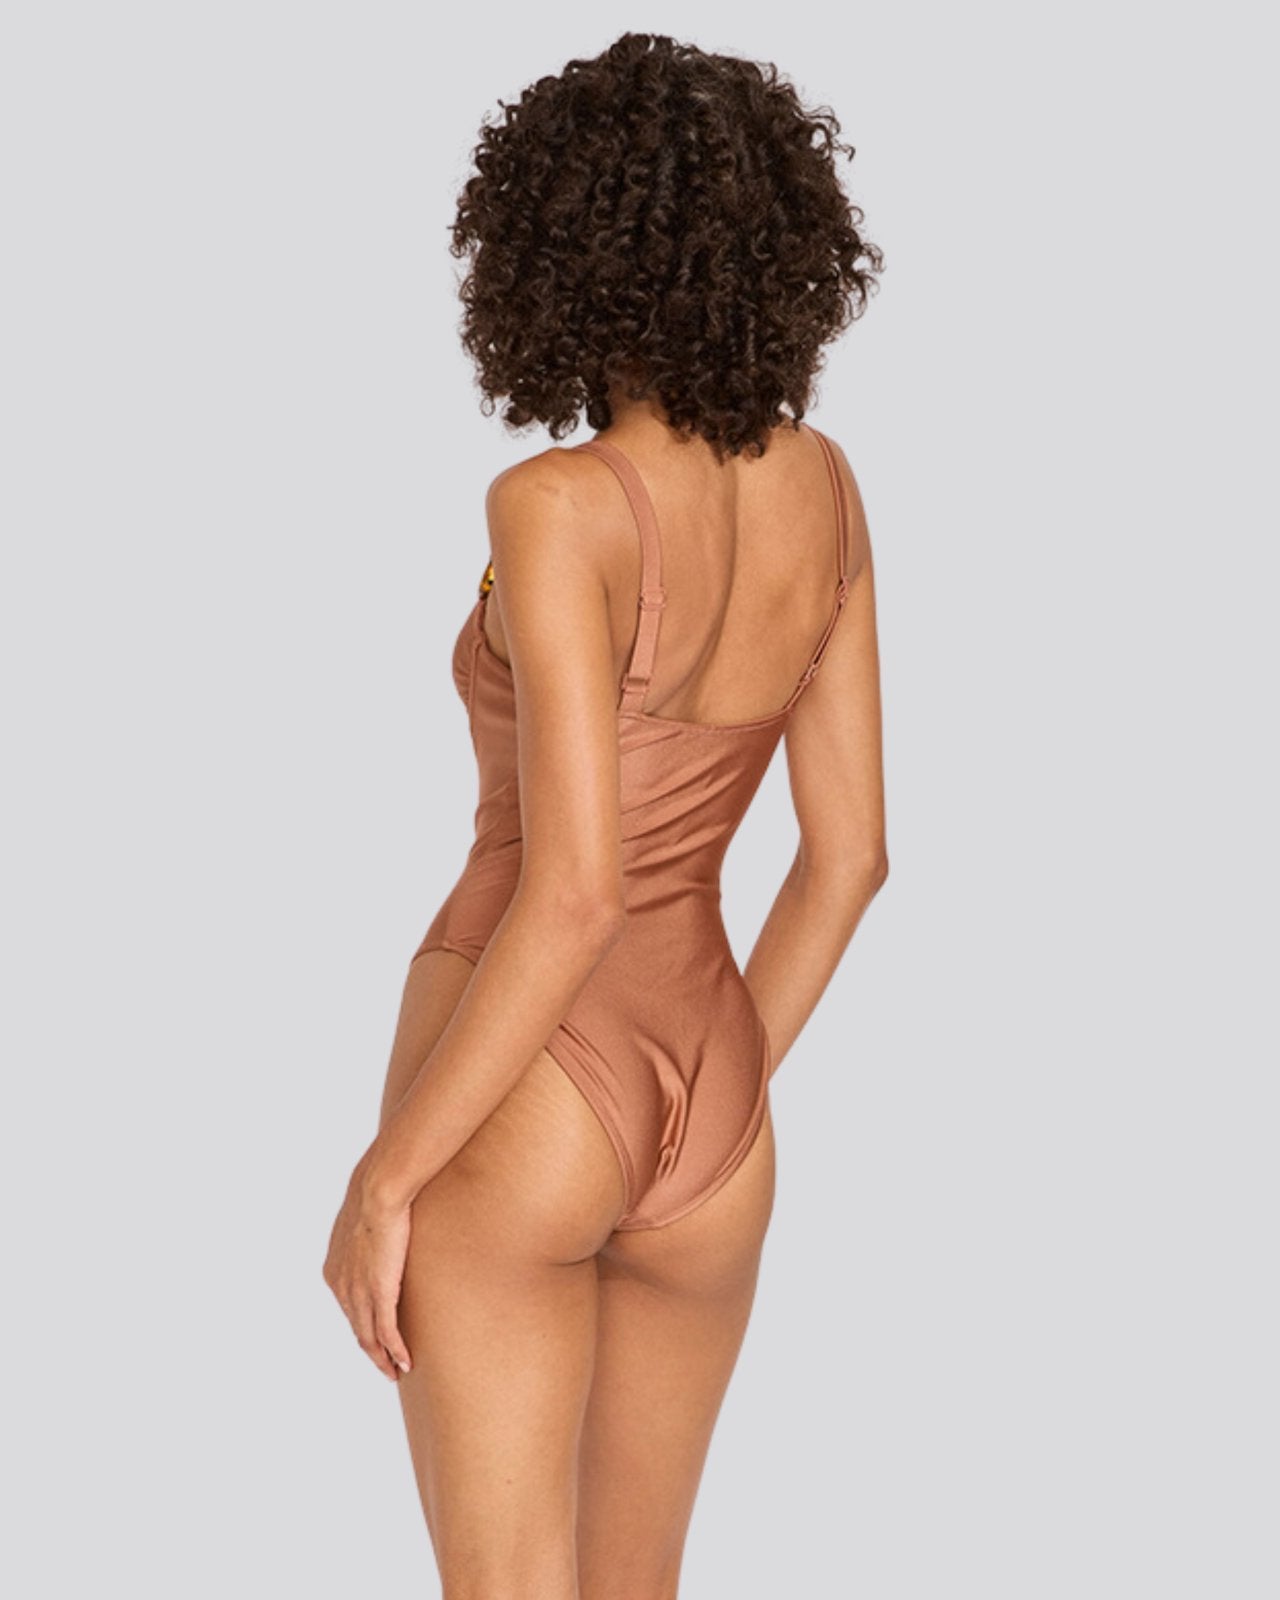 The Adrienne One Piece - Solid & Striped